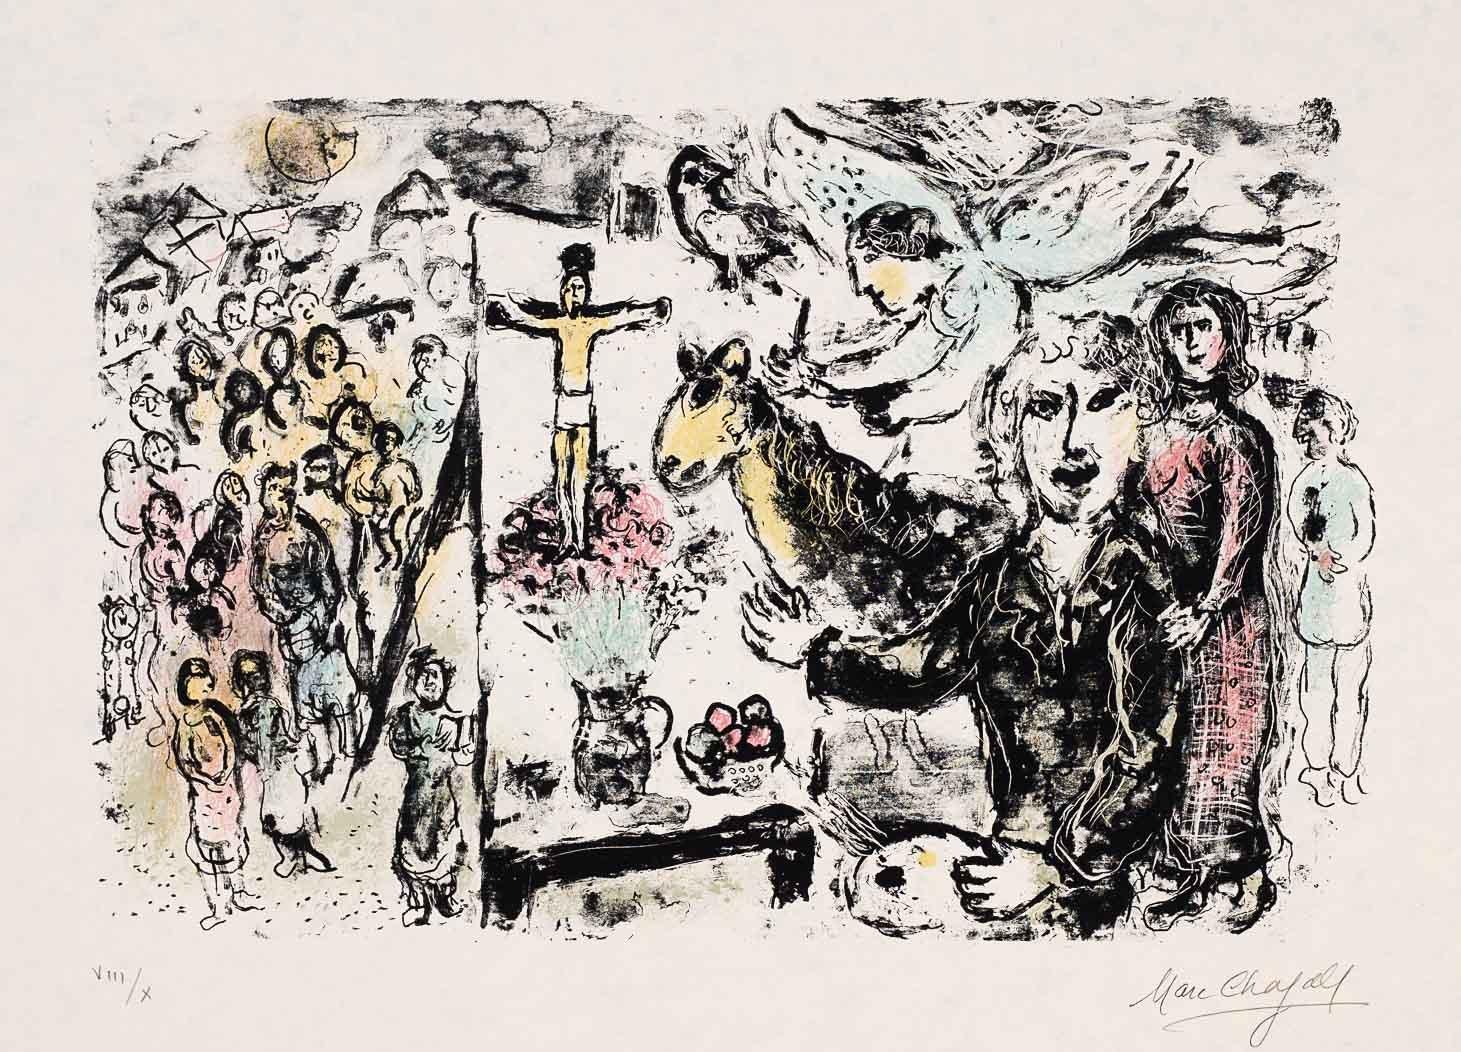 Marc Chagall Figurative Print - The Artist and Biblical Themes, 1974 (M.722)